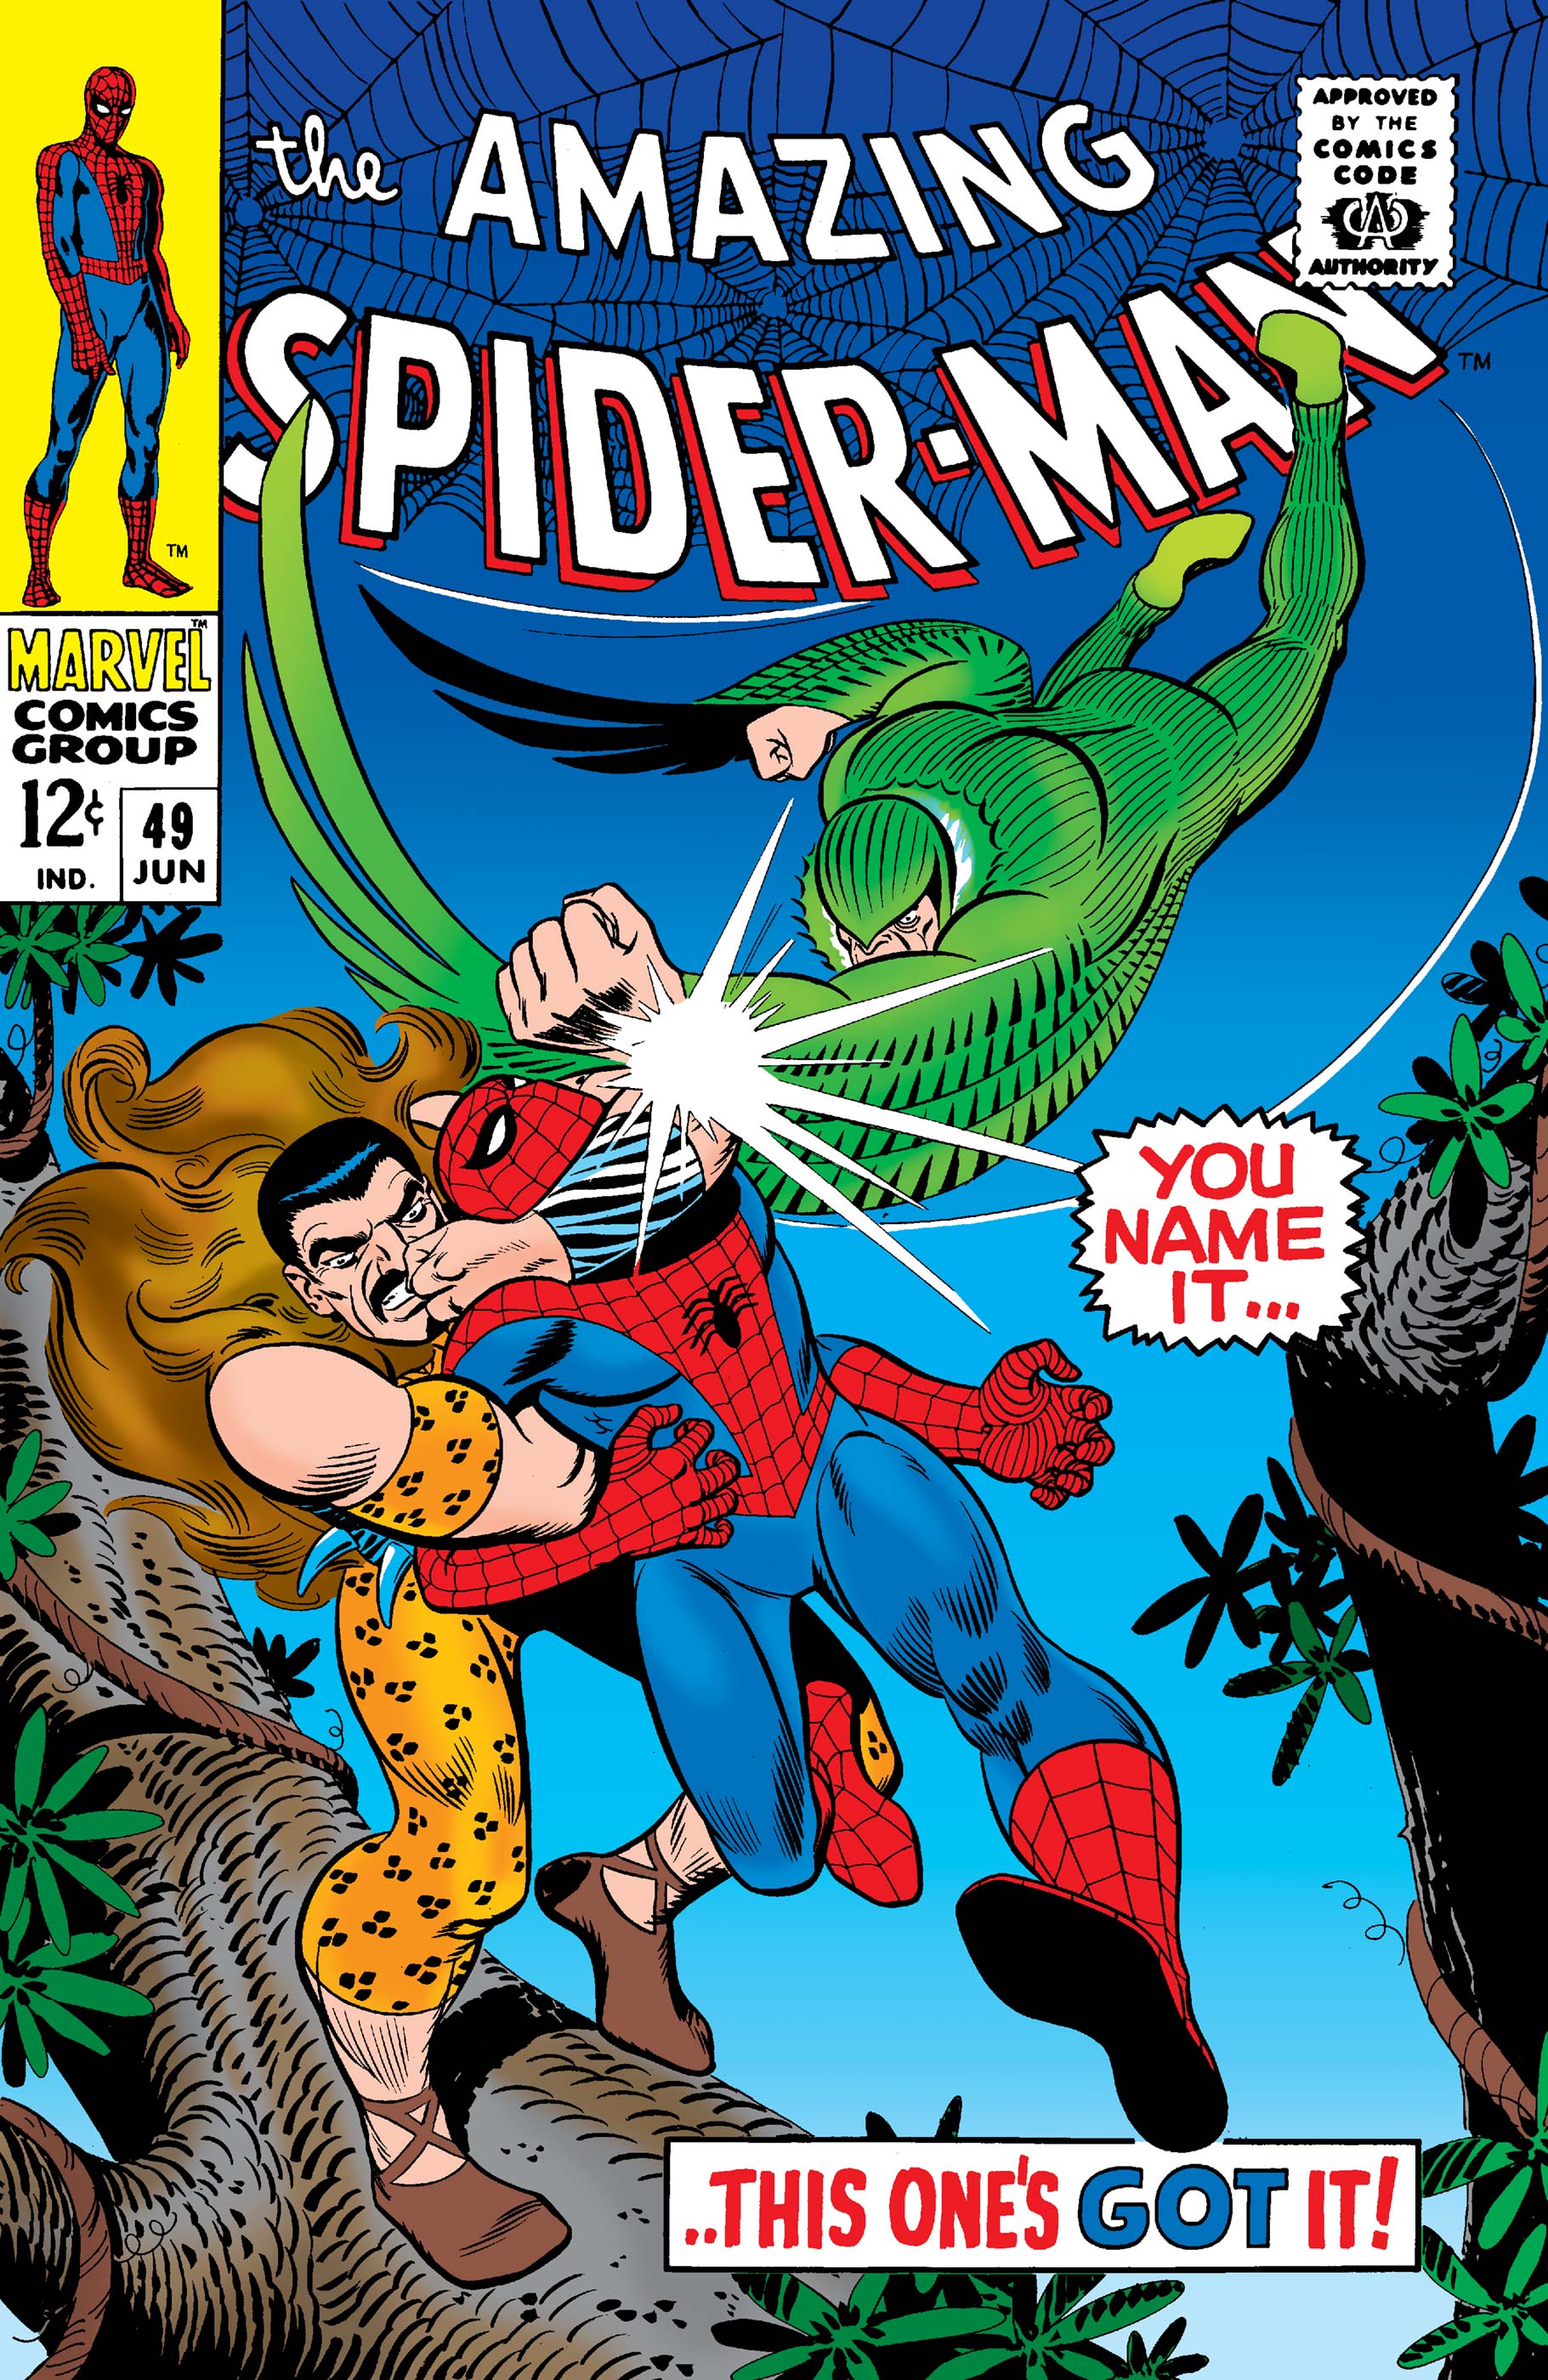 The Amazing Spider-Man (1963) #49 | Comic Issues | Marvel